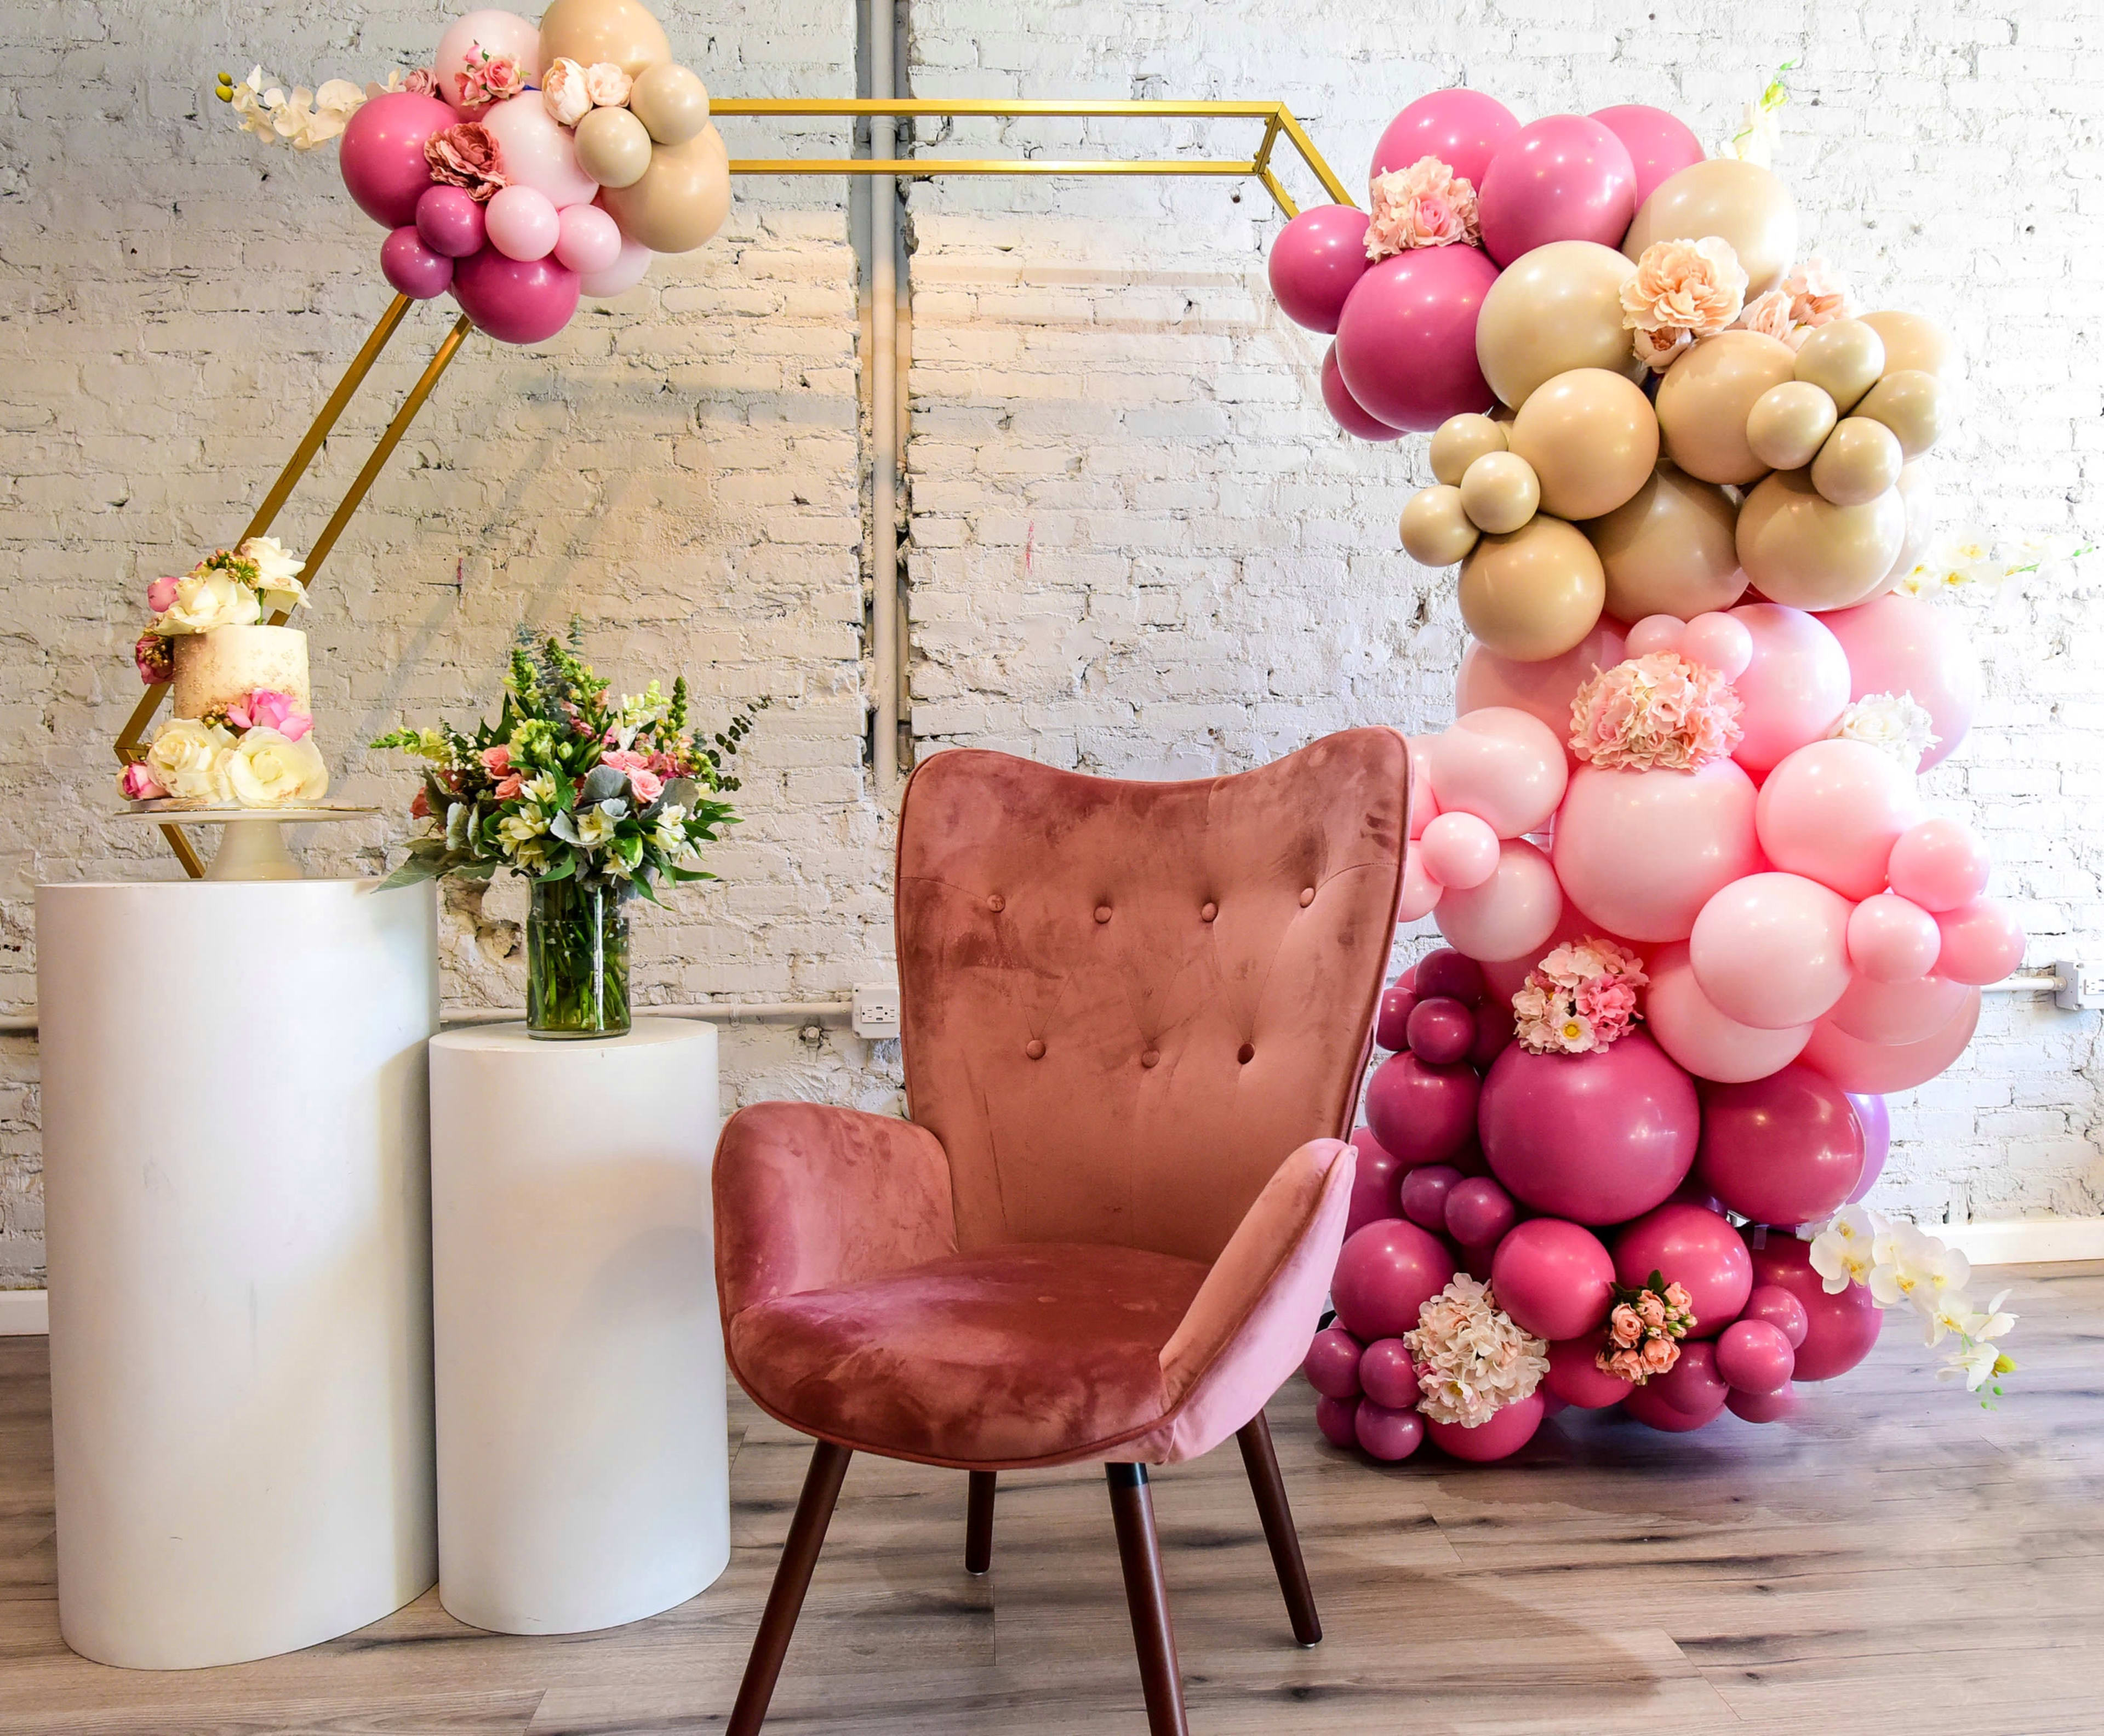 A pink chair surrounded by balloons at a bridal shower.